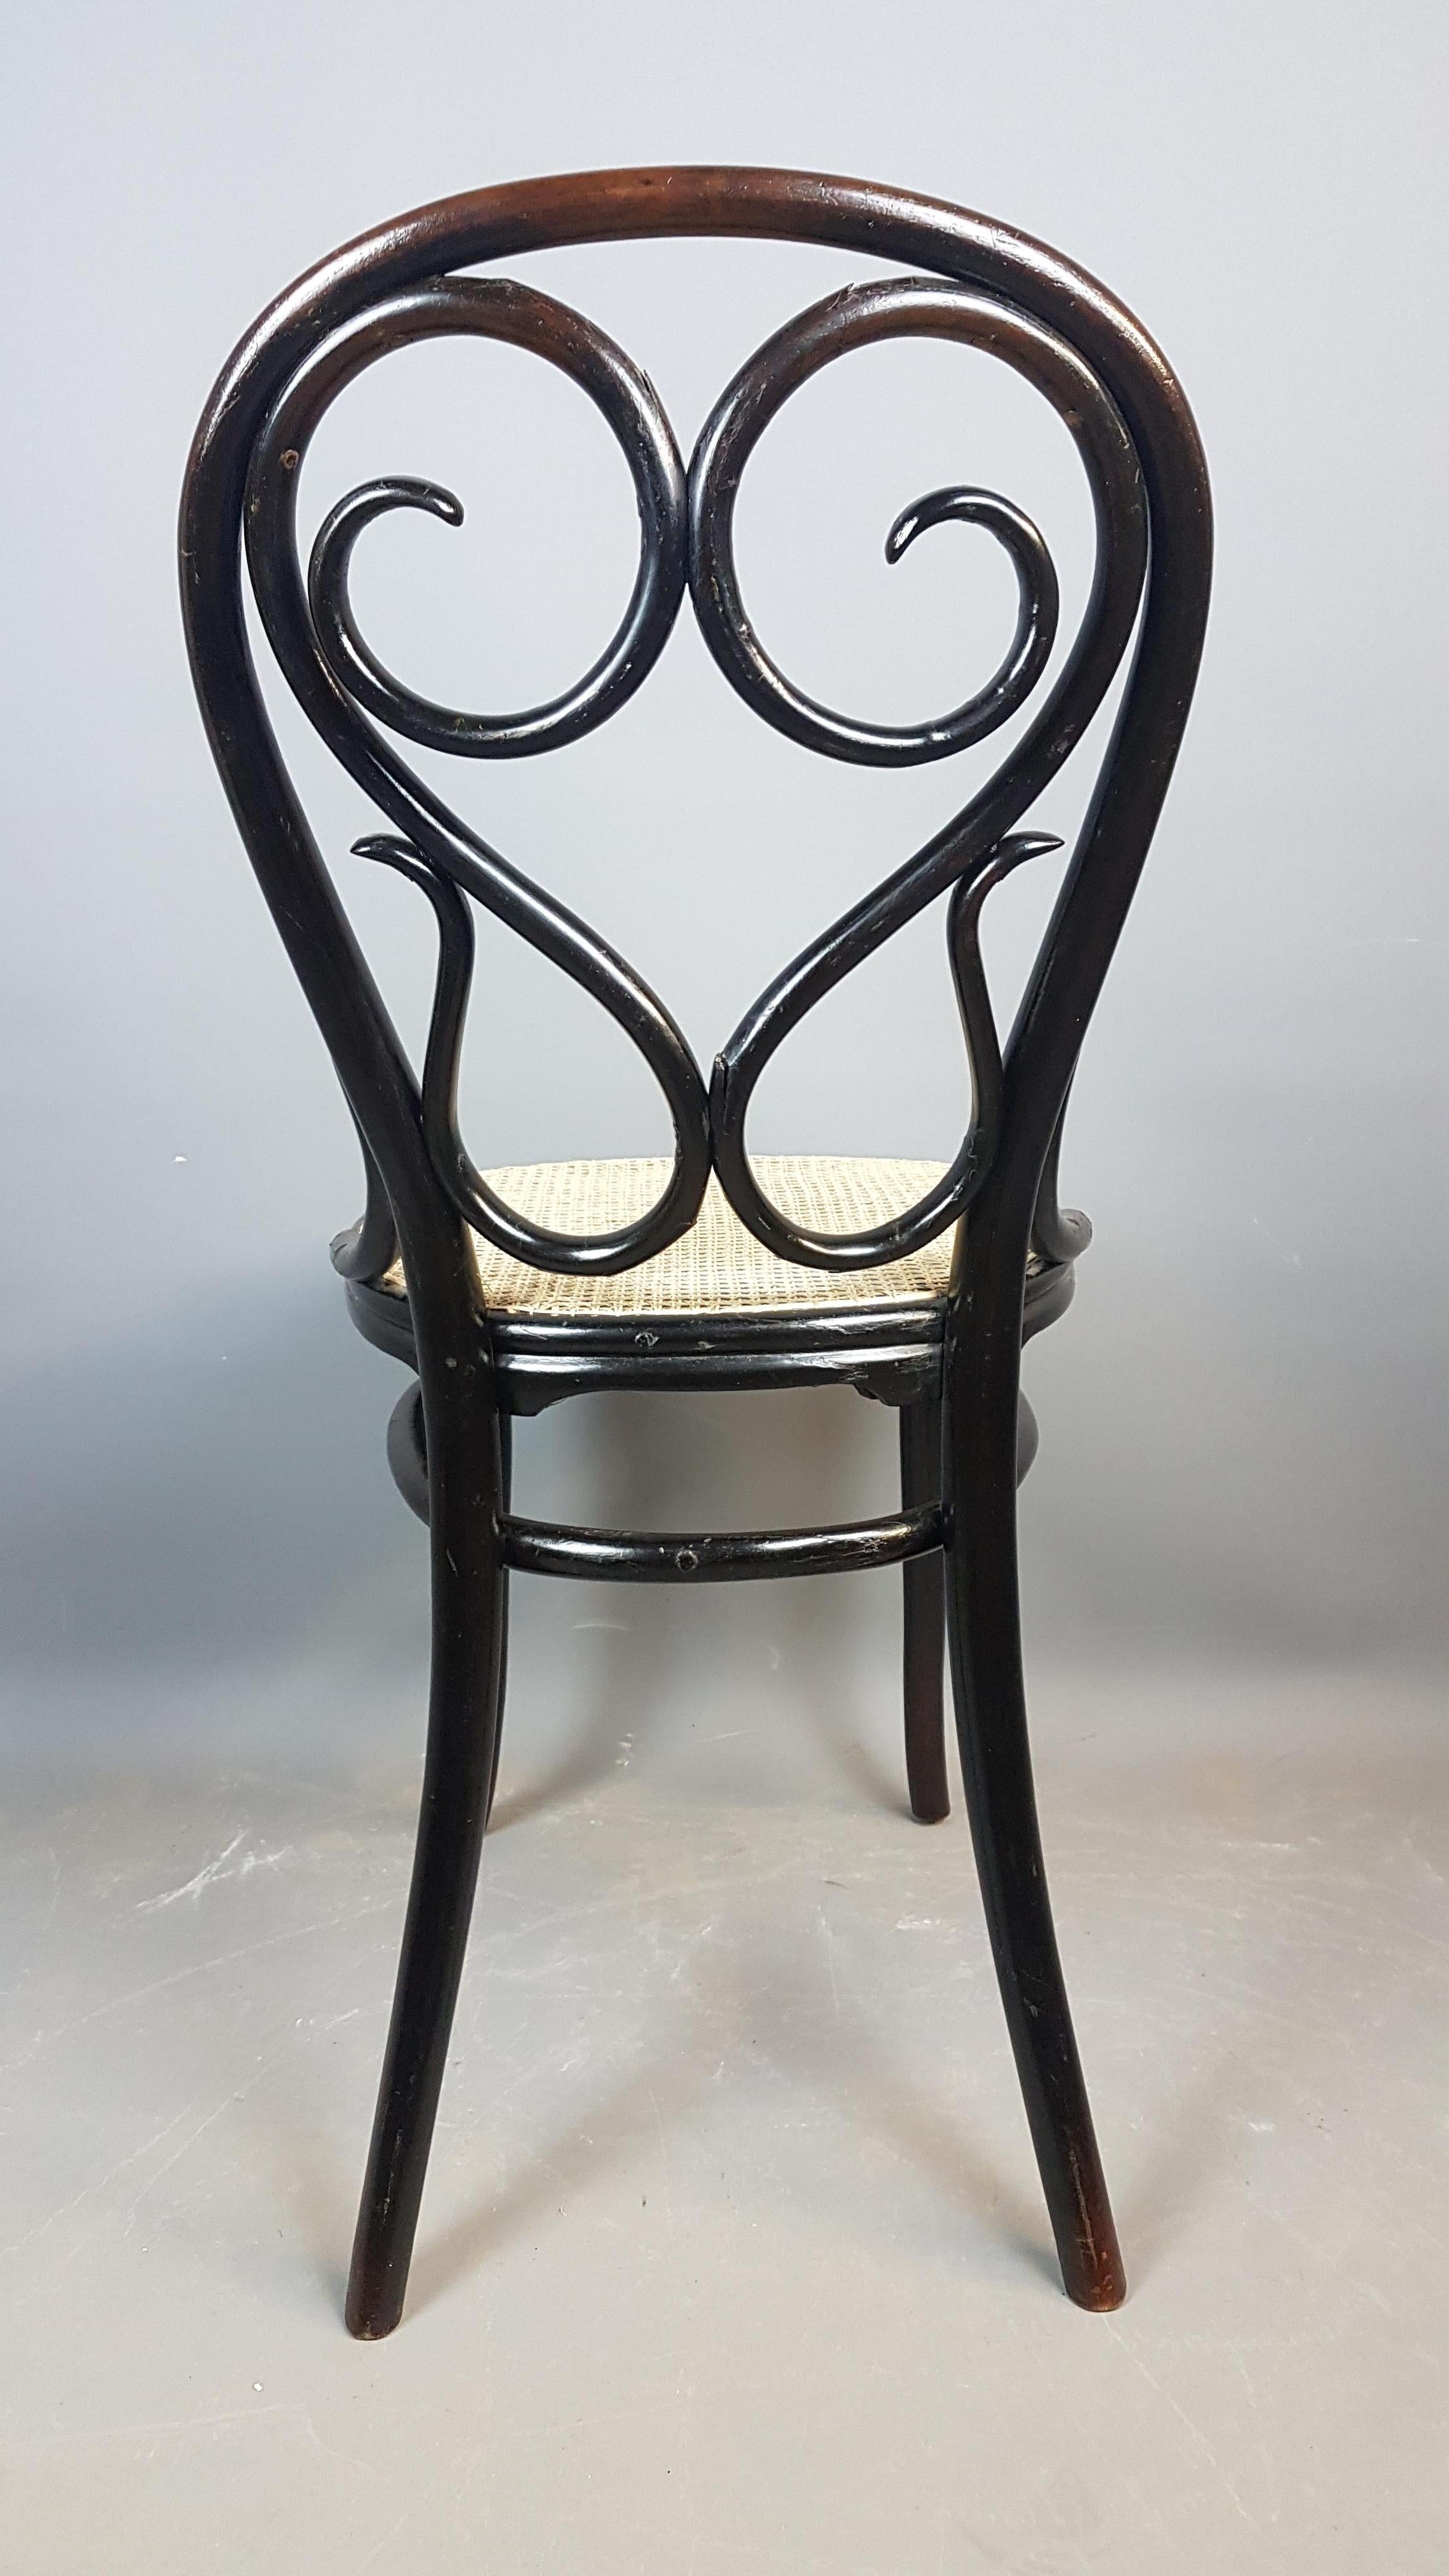 19th Century Thonet No.4 Austrian Bentwood Cafe Daum Chair In Distressed Condition For Sale In Bodicote, Oxfordshire